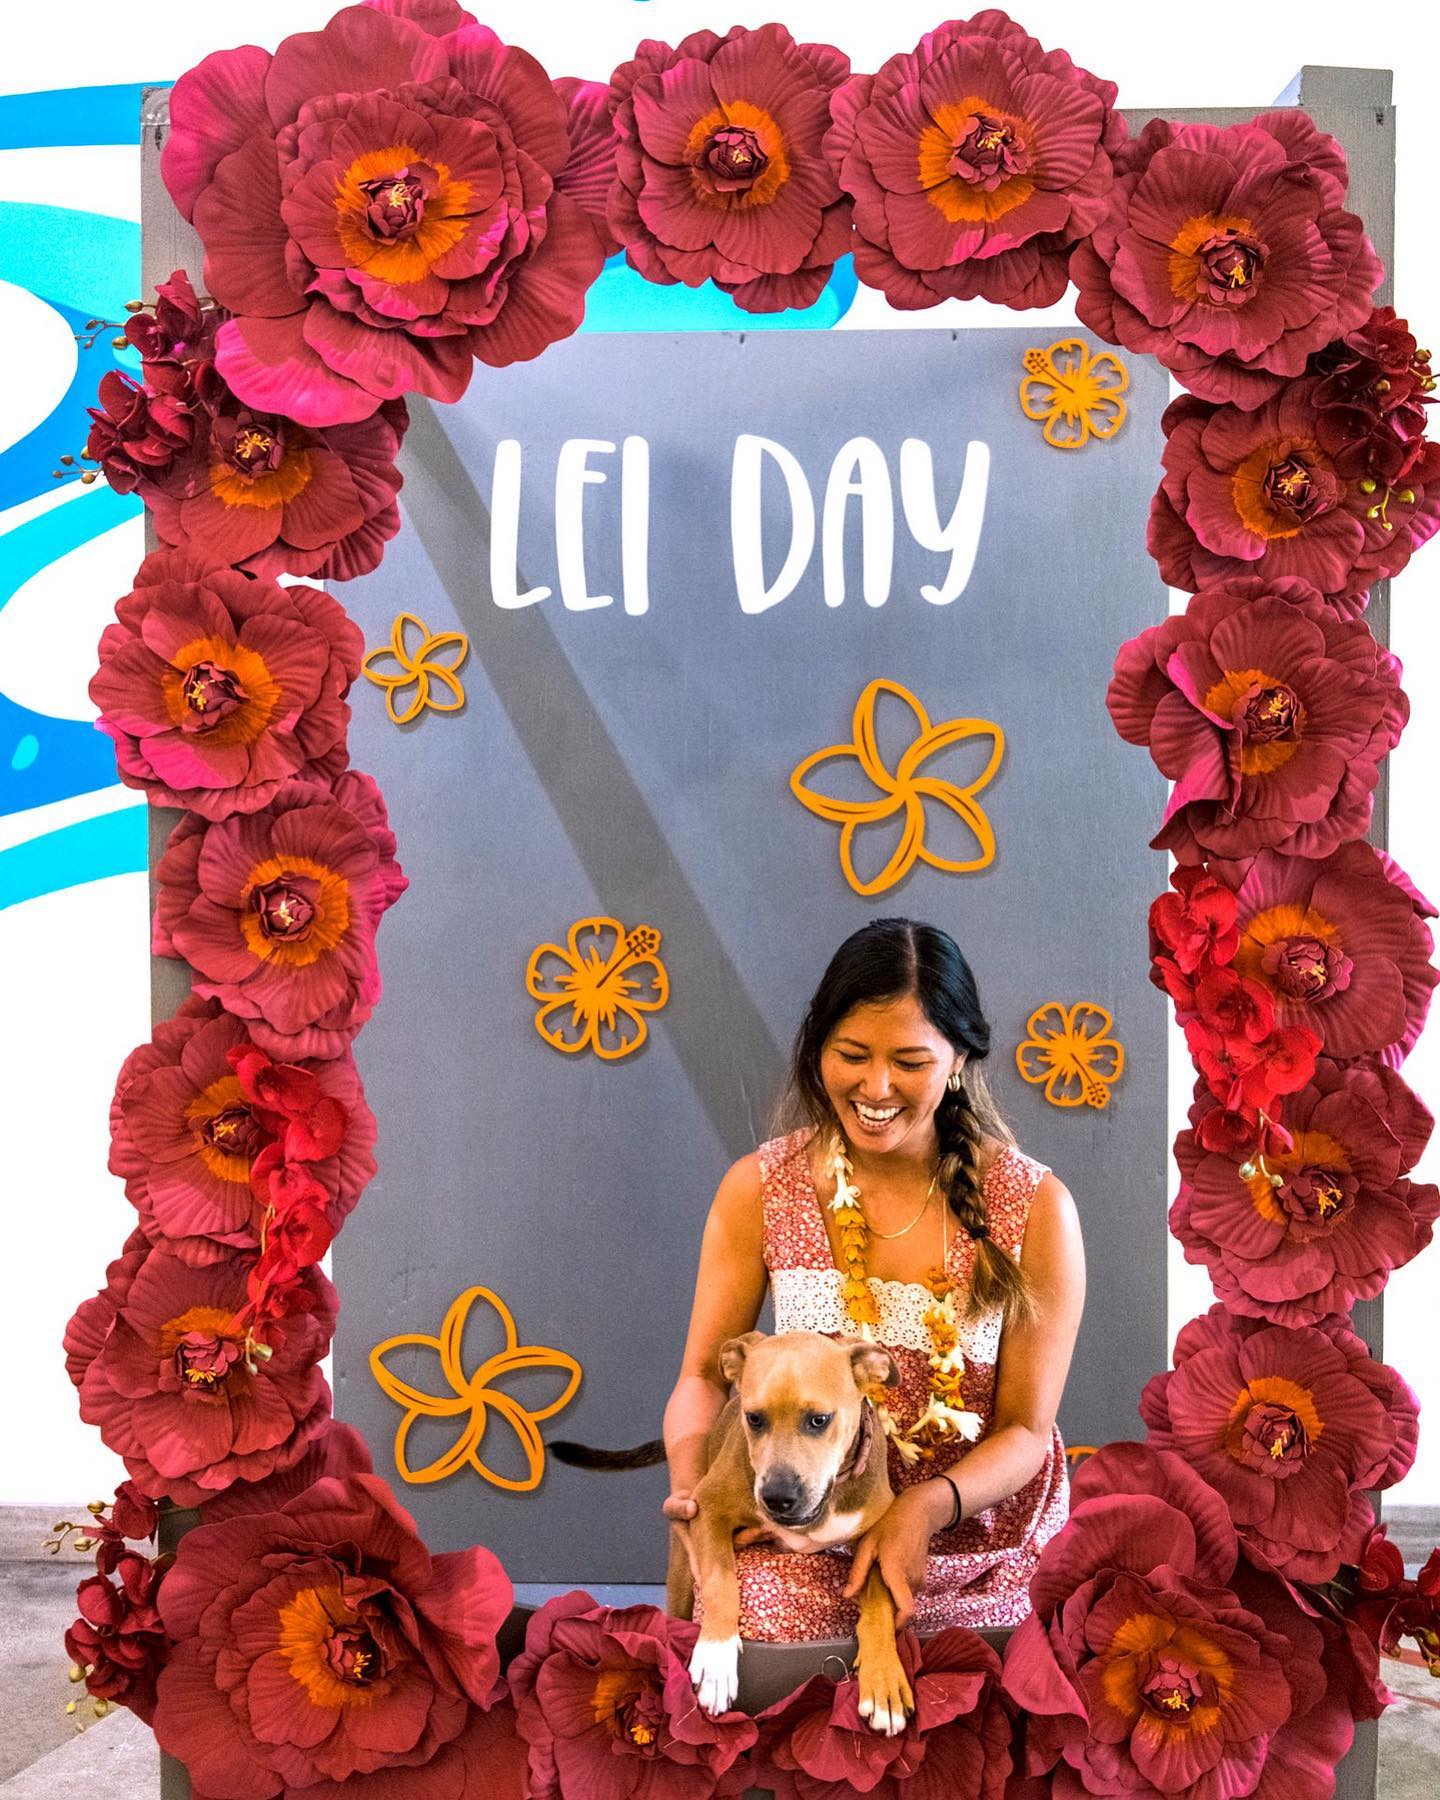 May Day is Lei Day in Hawai’i! In celebration of this traditional holiday, bring your family and friends to South Shore Market for a larger-than-life lei photo opportunity on display throughout the entire month of May. Visit the link in bio for more details!